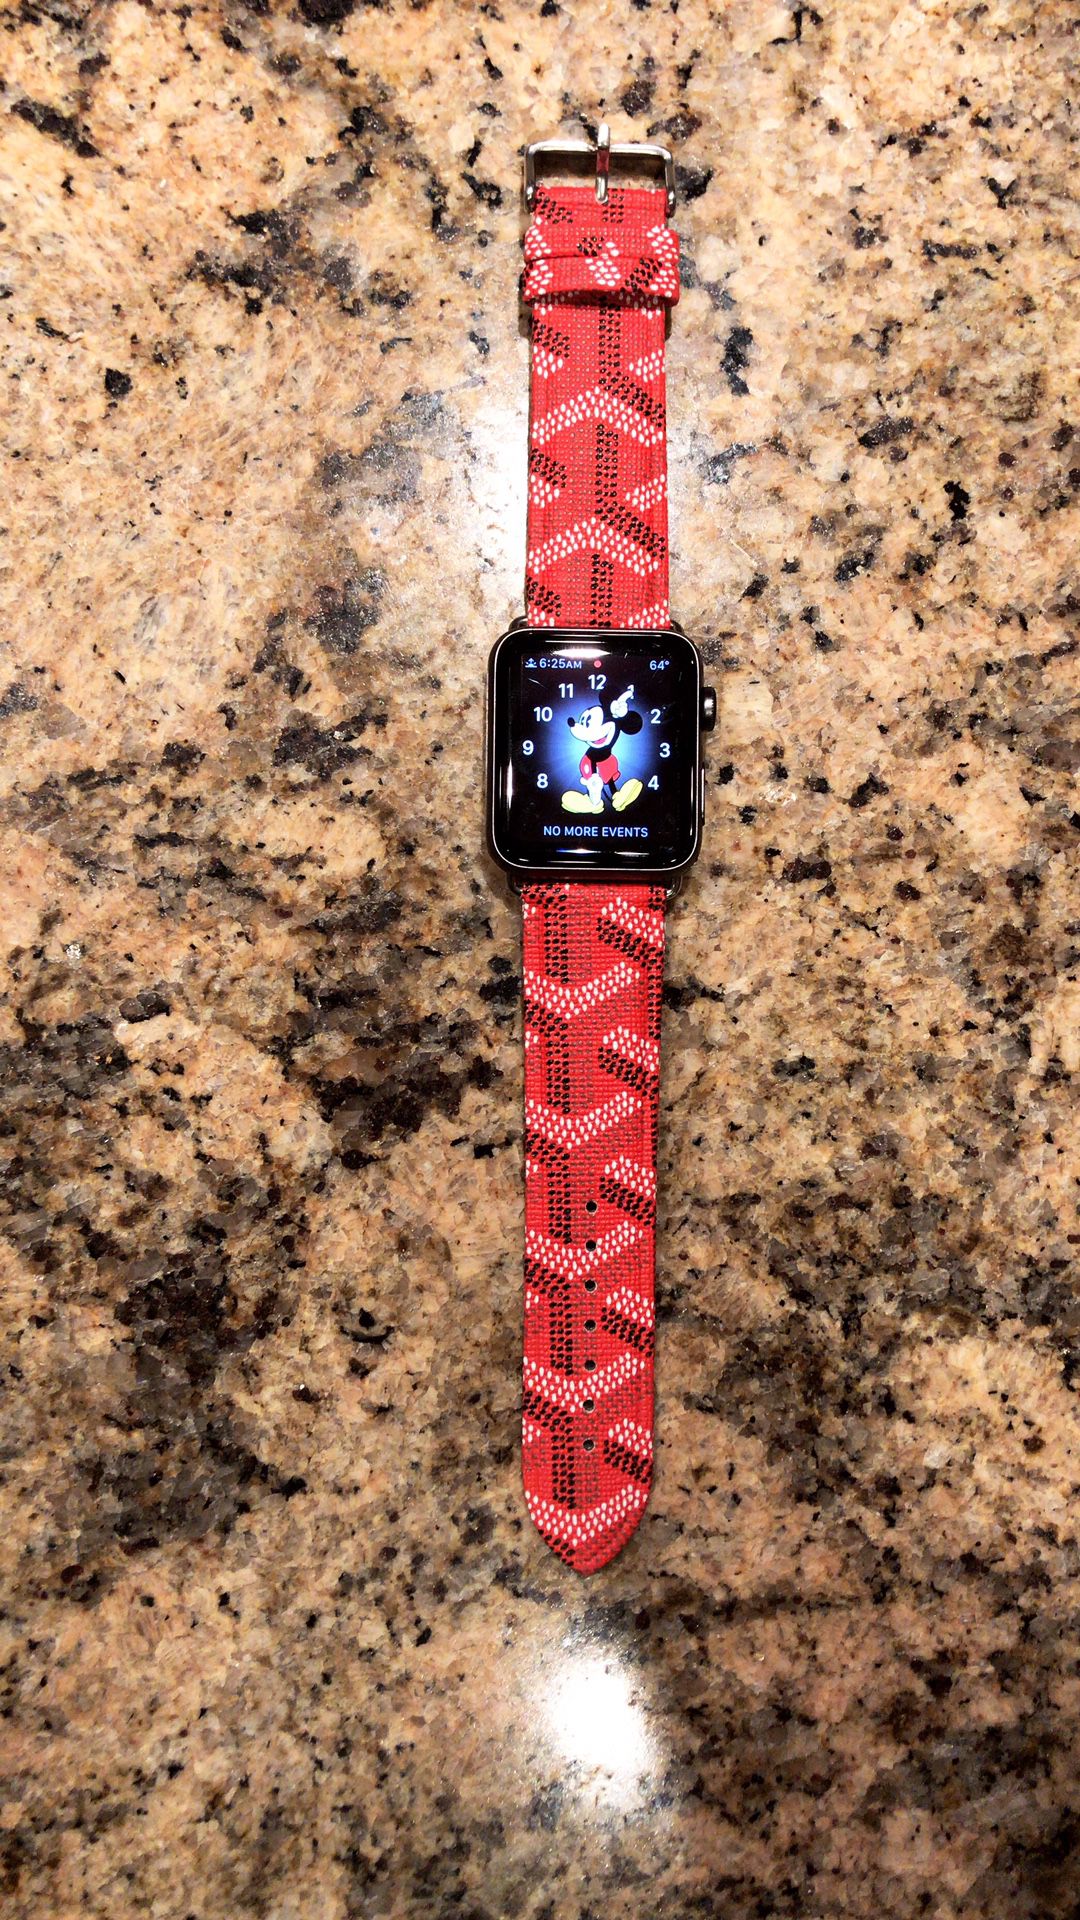 LOUIS VUITTON, GUCCI, BURBERRY, and MCM AUTHENTIC CUSTOM APPLE WATCH BANDS  for Sale in Los Angeles, CA - OfferUp